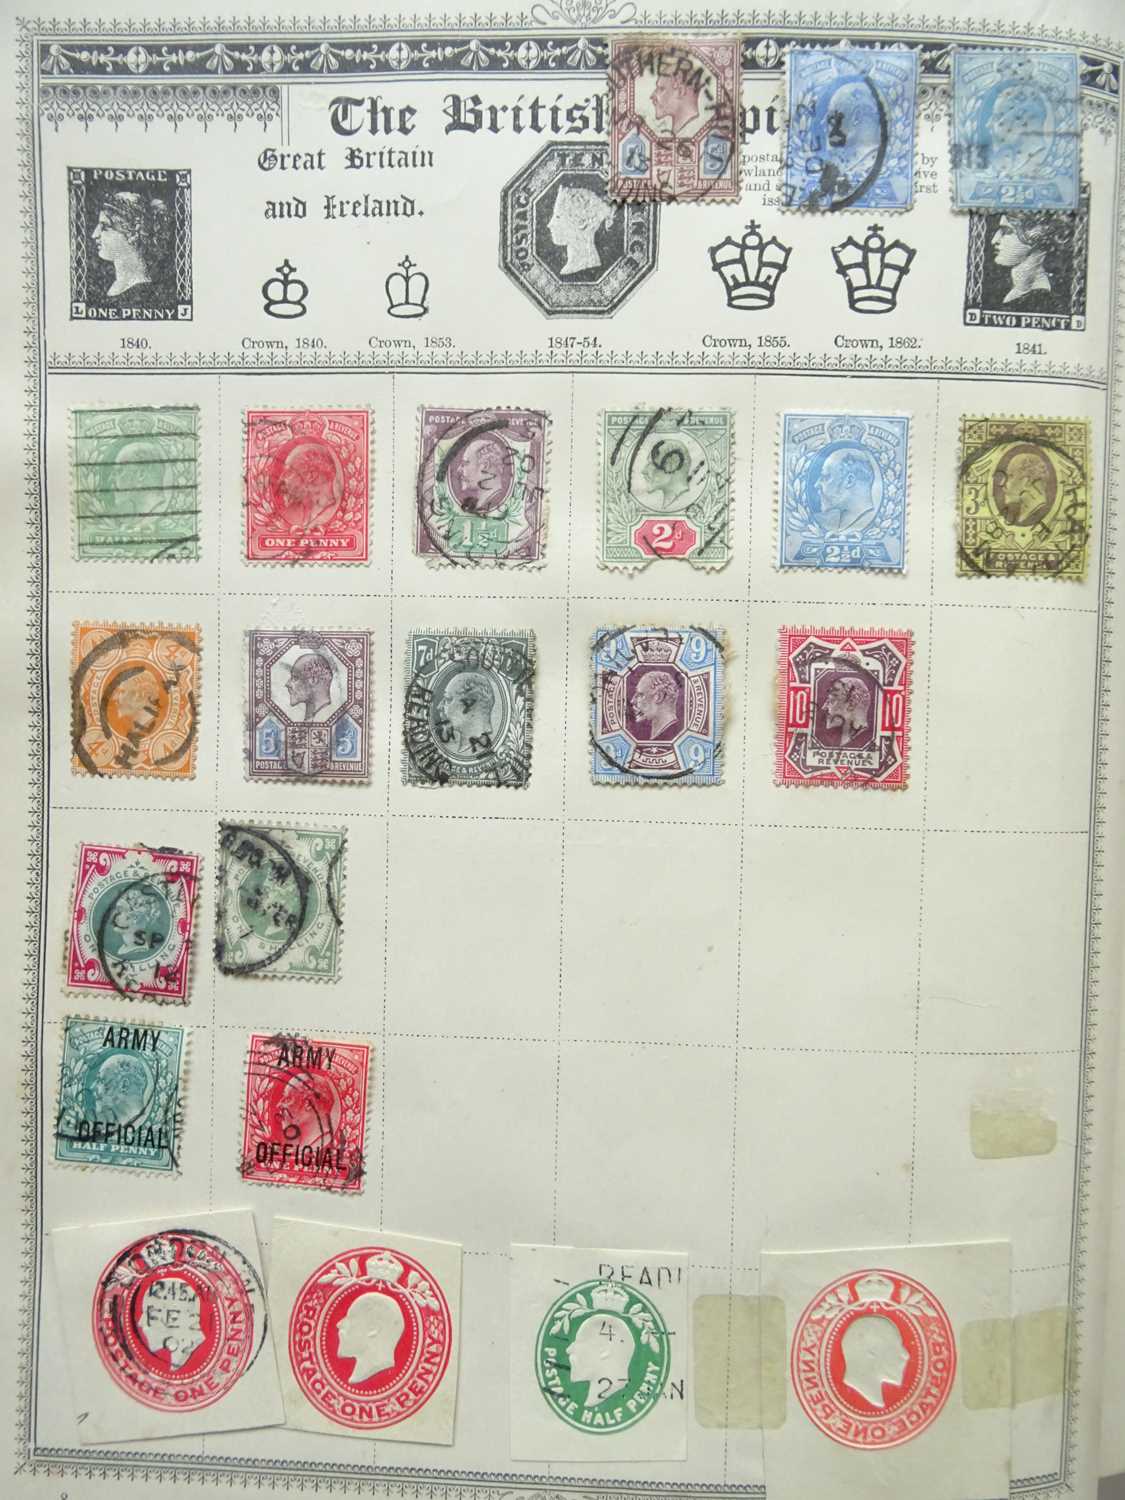 Vintage Stamp Collection, in 'The Queen' album incl. penny black, Canada 10cts Jubilee partly - Image 2 of 10